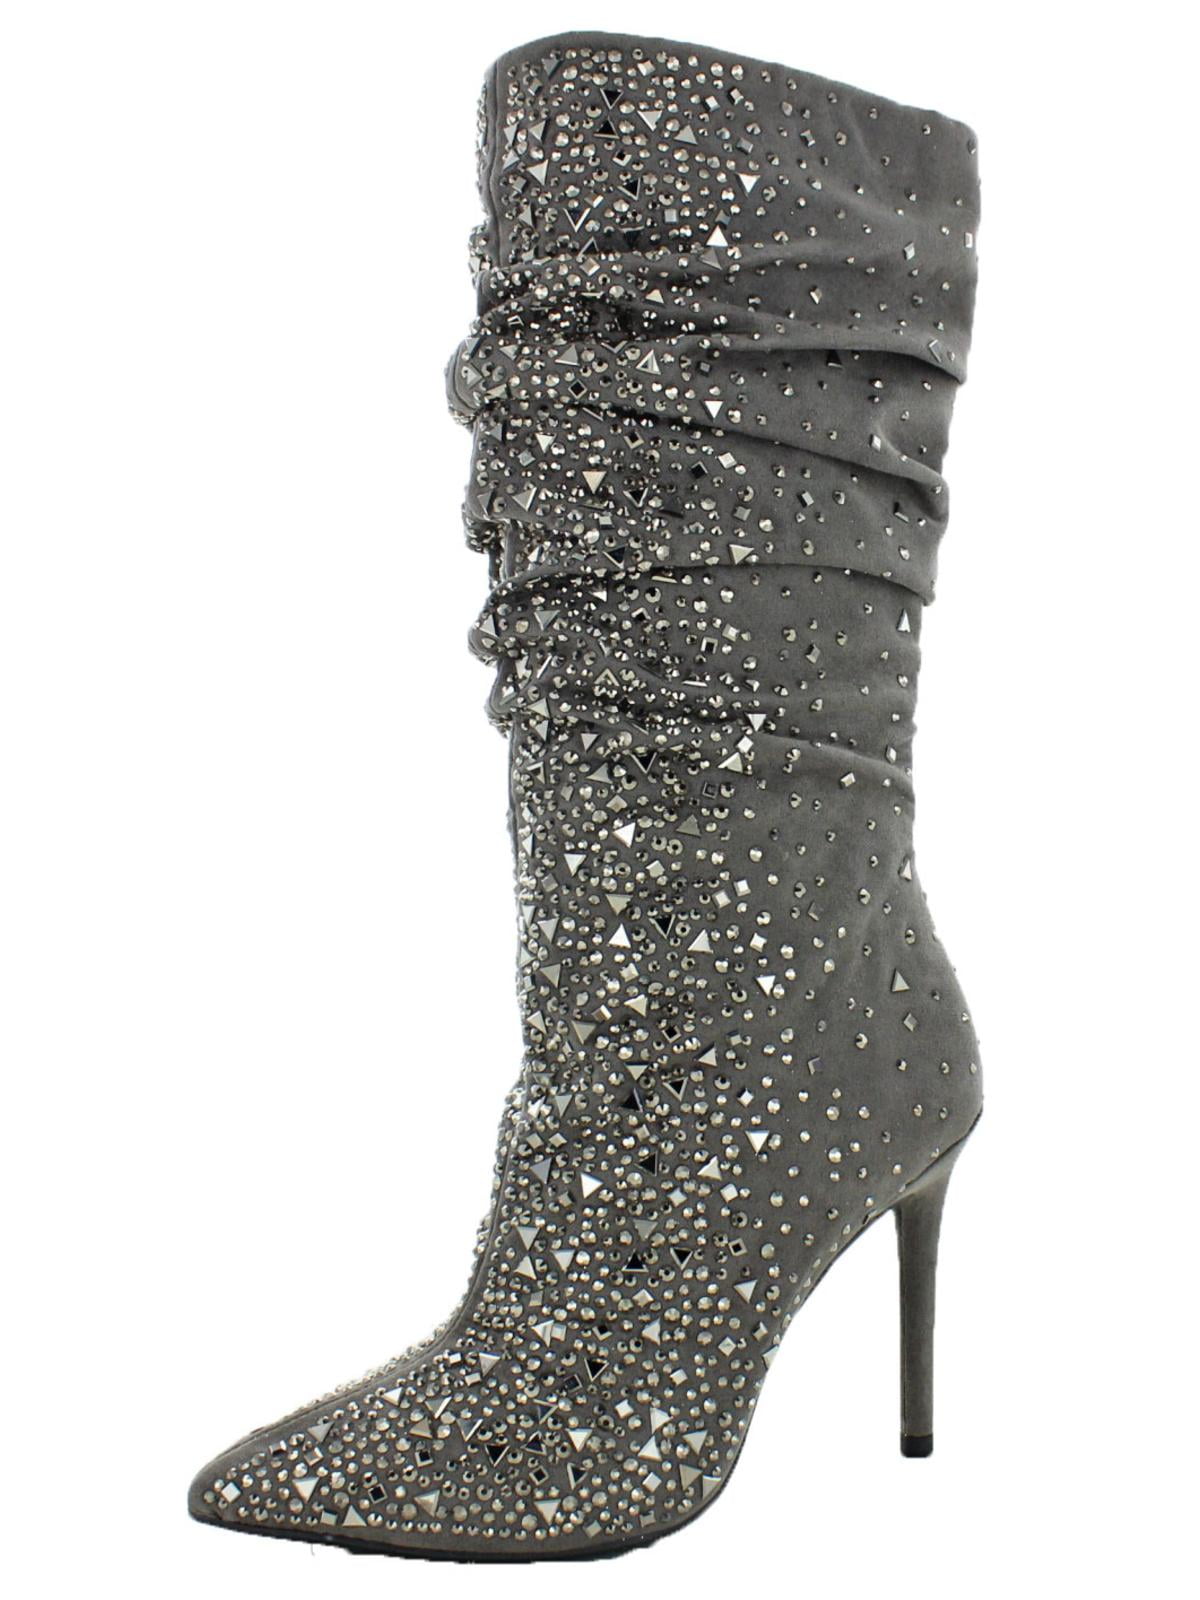 jessica simpson bling boots